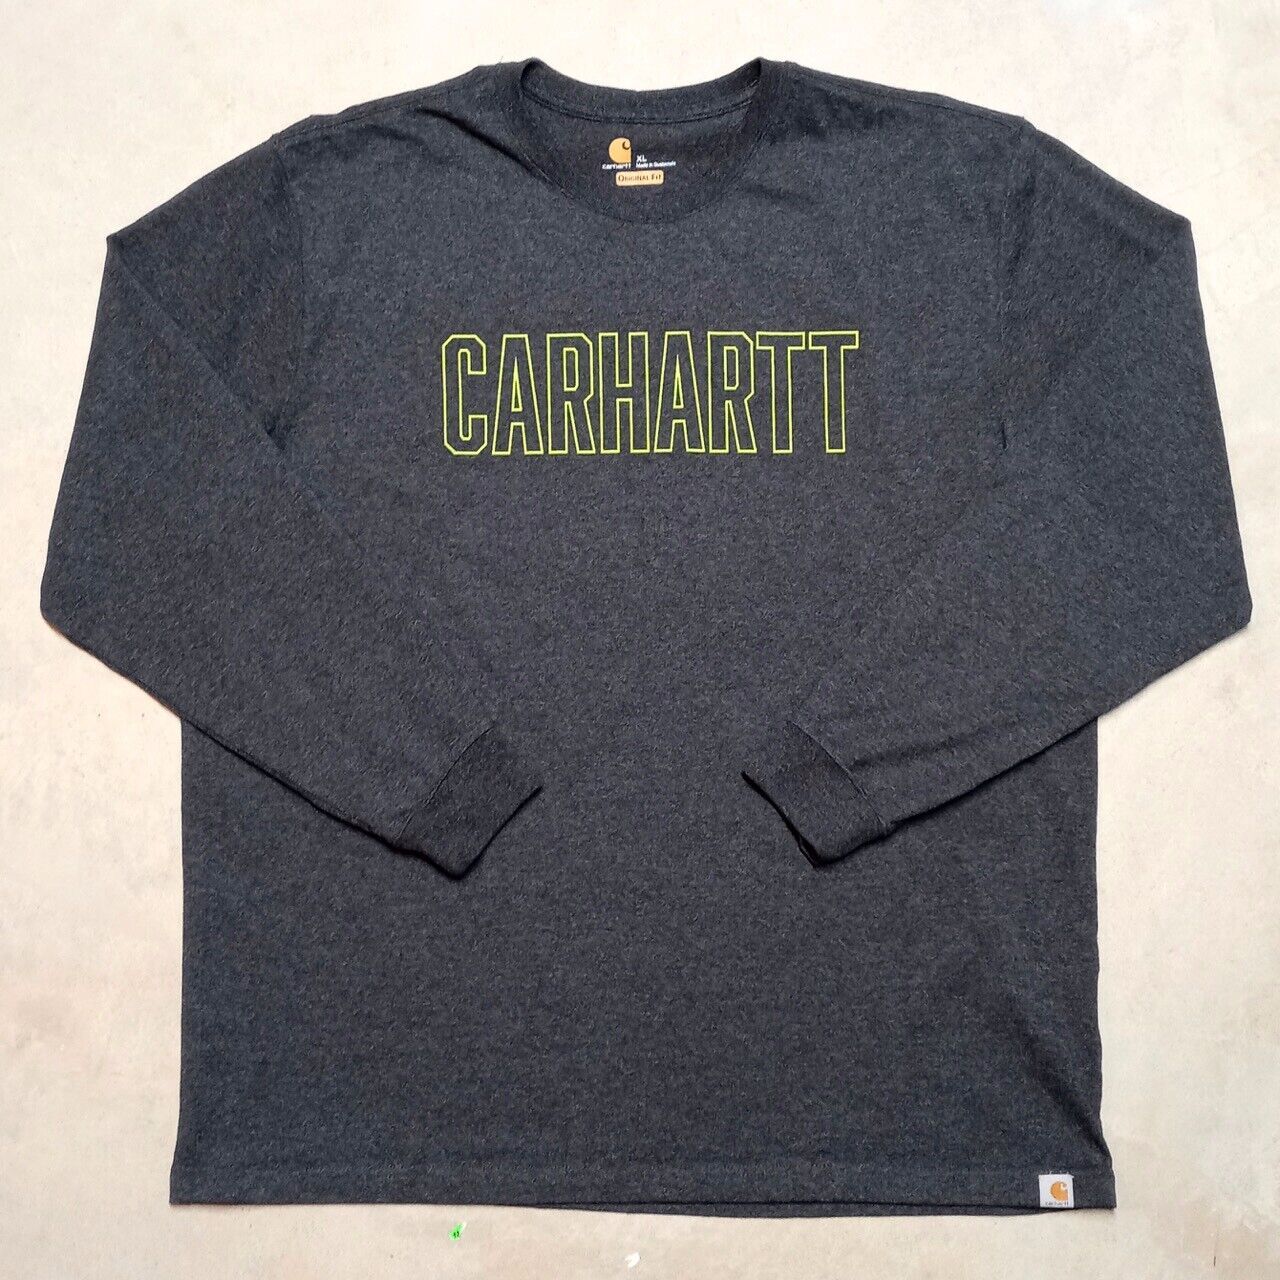 Primary image for Carhartt Original Fit Long Sleeve Graphic Spellout T-Shirt - Mens Size XL